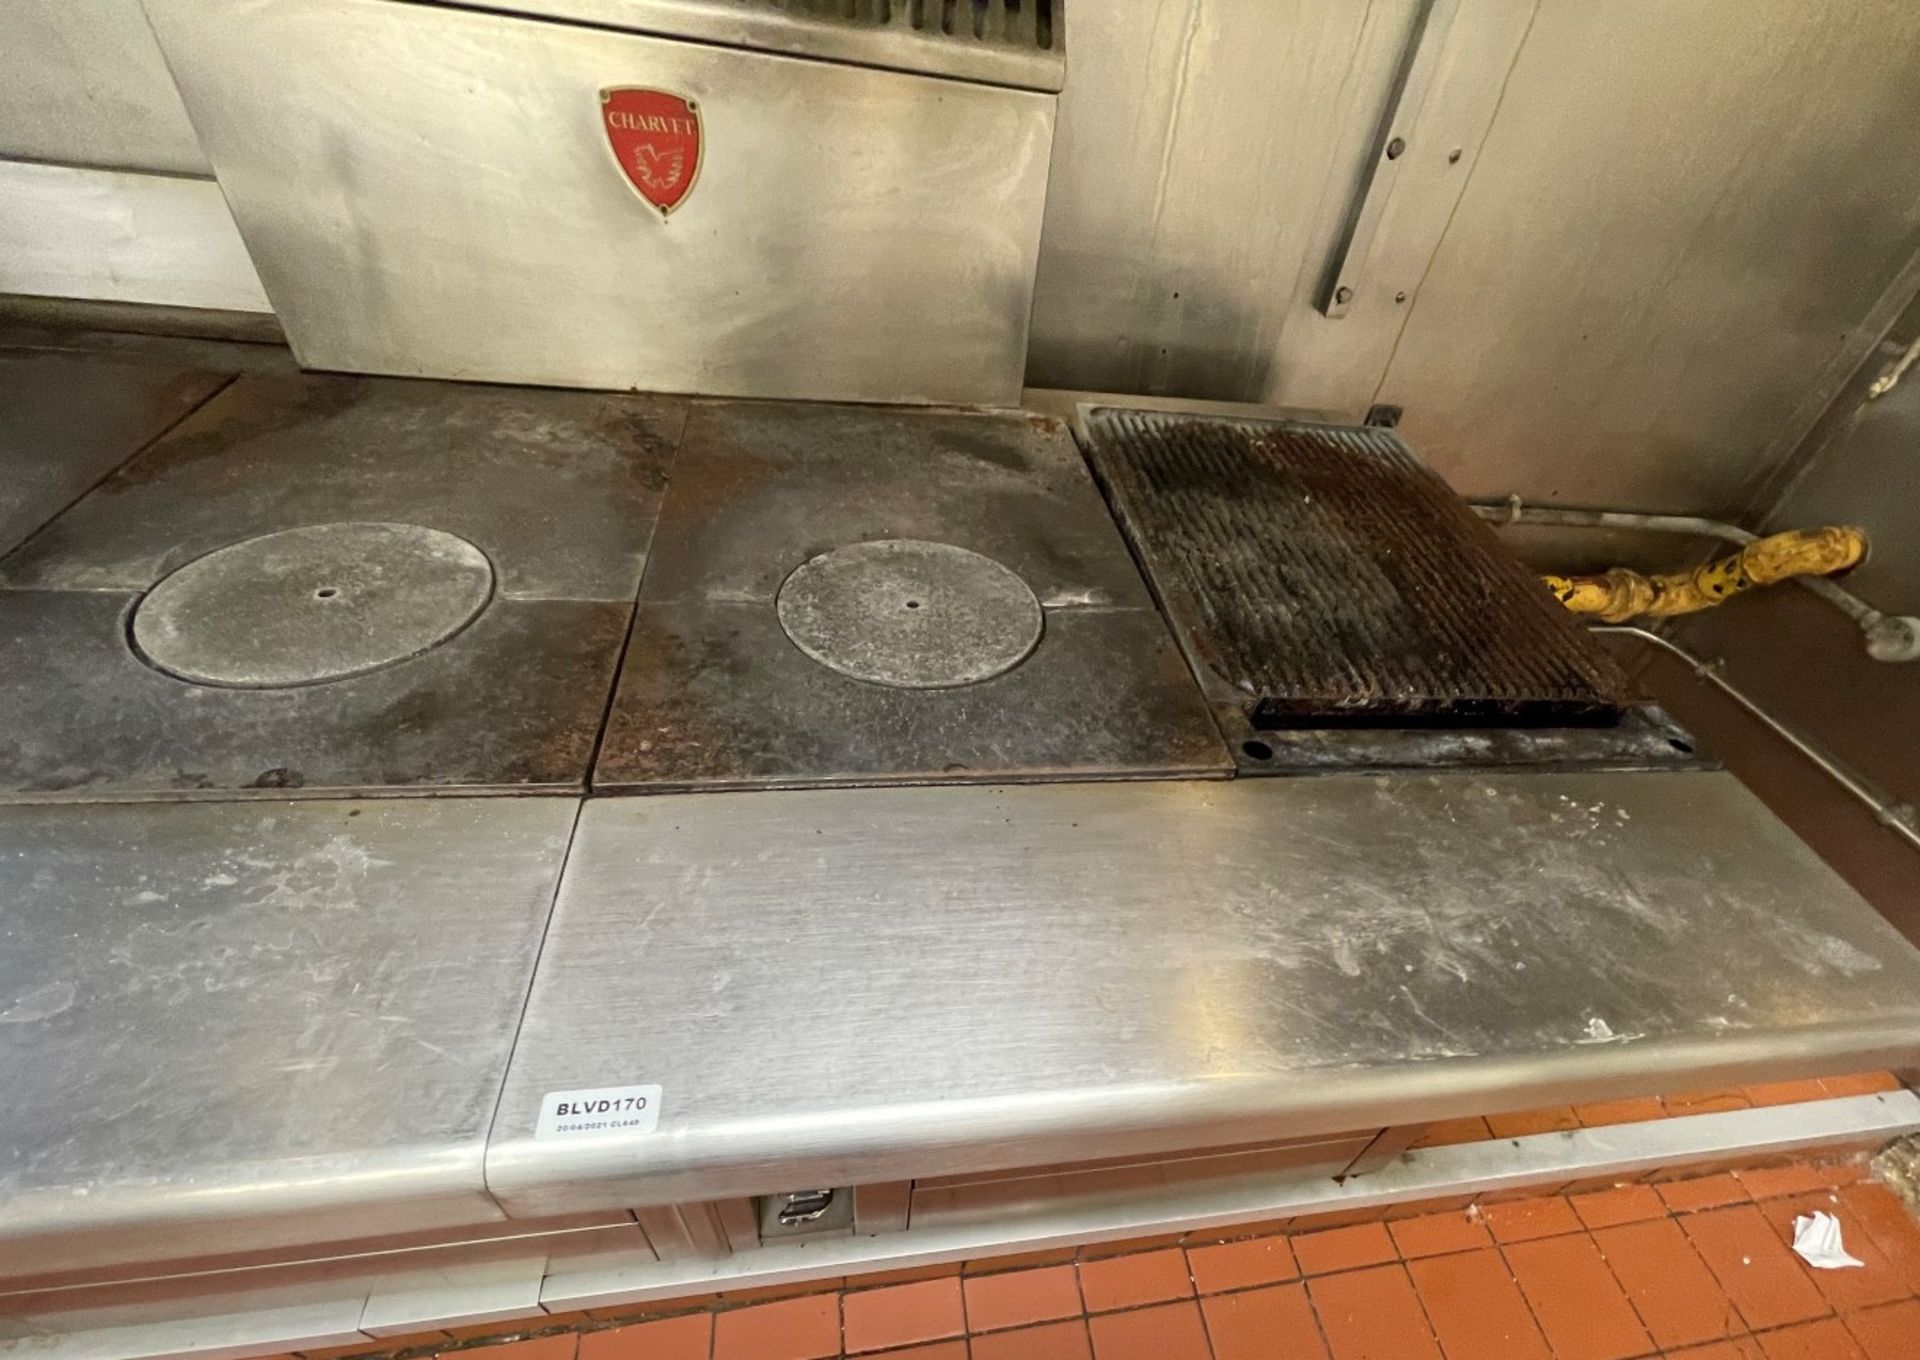 2 x Paul Charvet Charavines Target Griddle Range Cookers - Gas Fired - Ref: BLVD169 /170 - CL649 - - Image 4 of 8